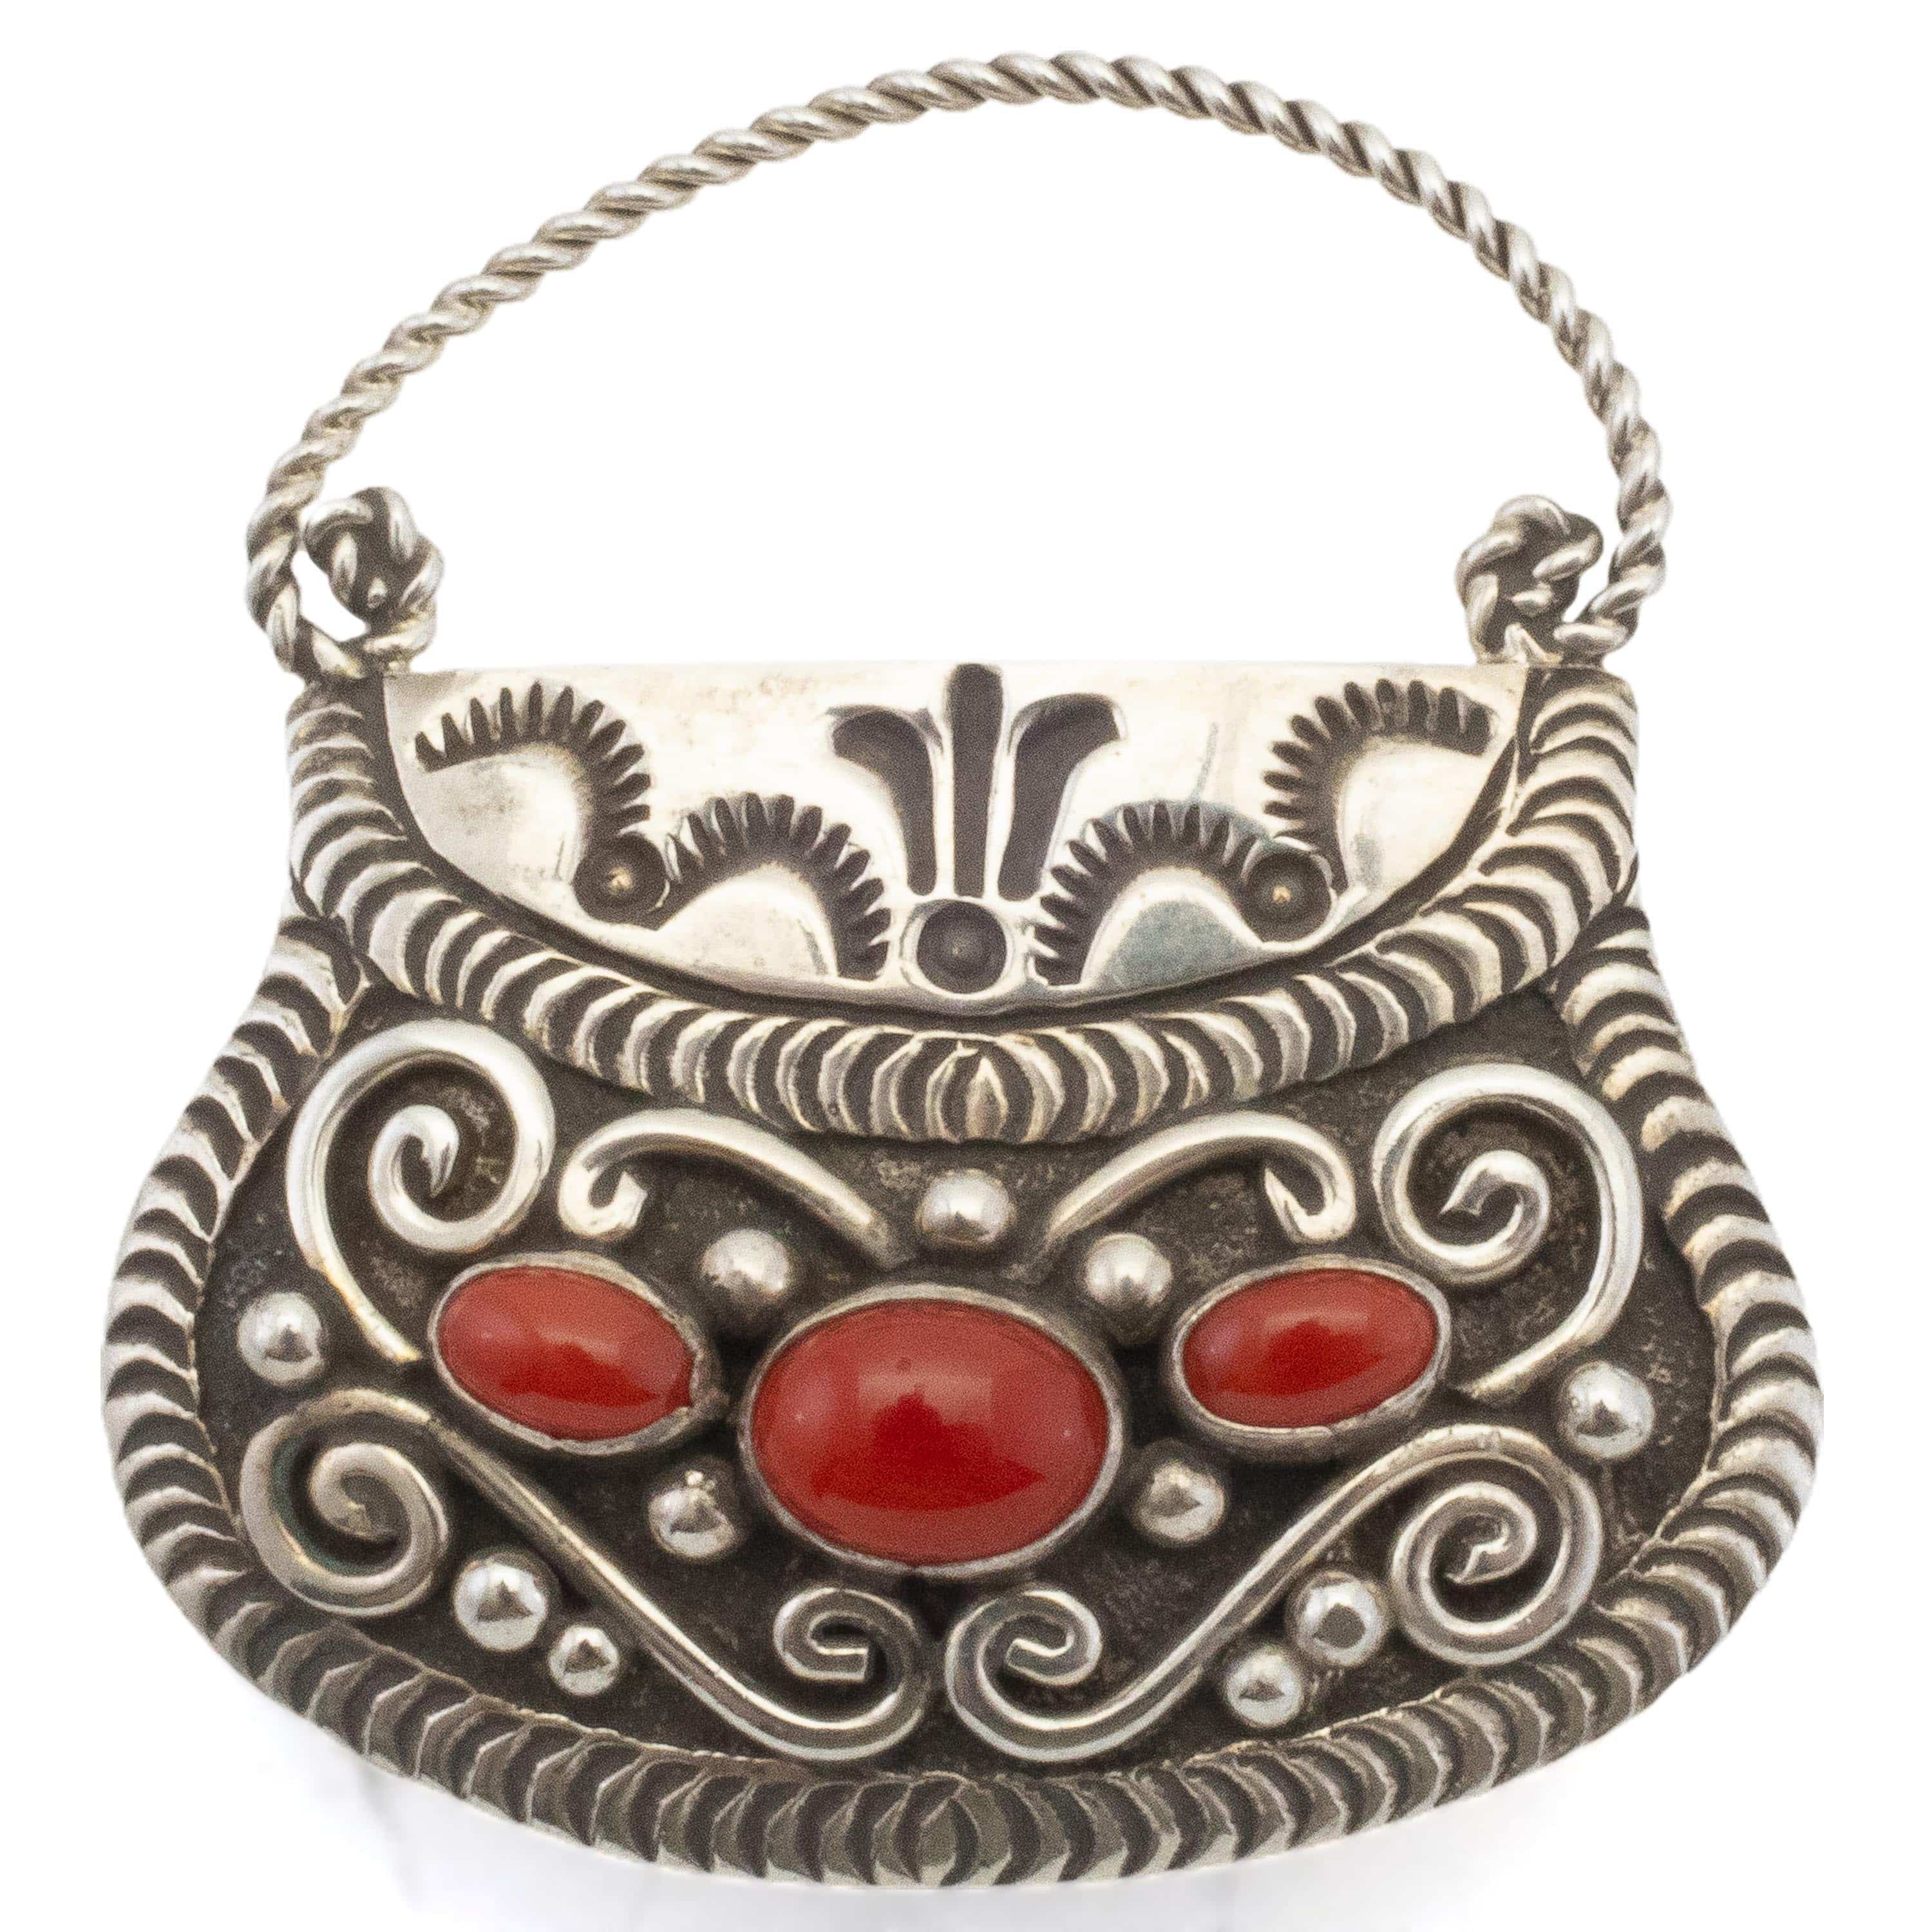 Pin on Shopping: Purses and Jewelry